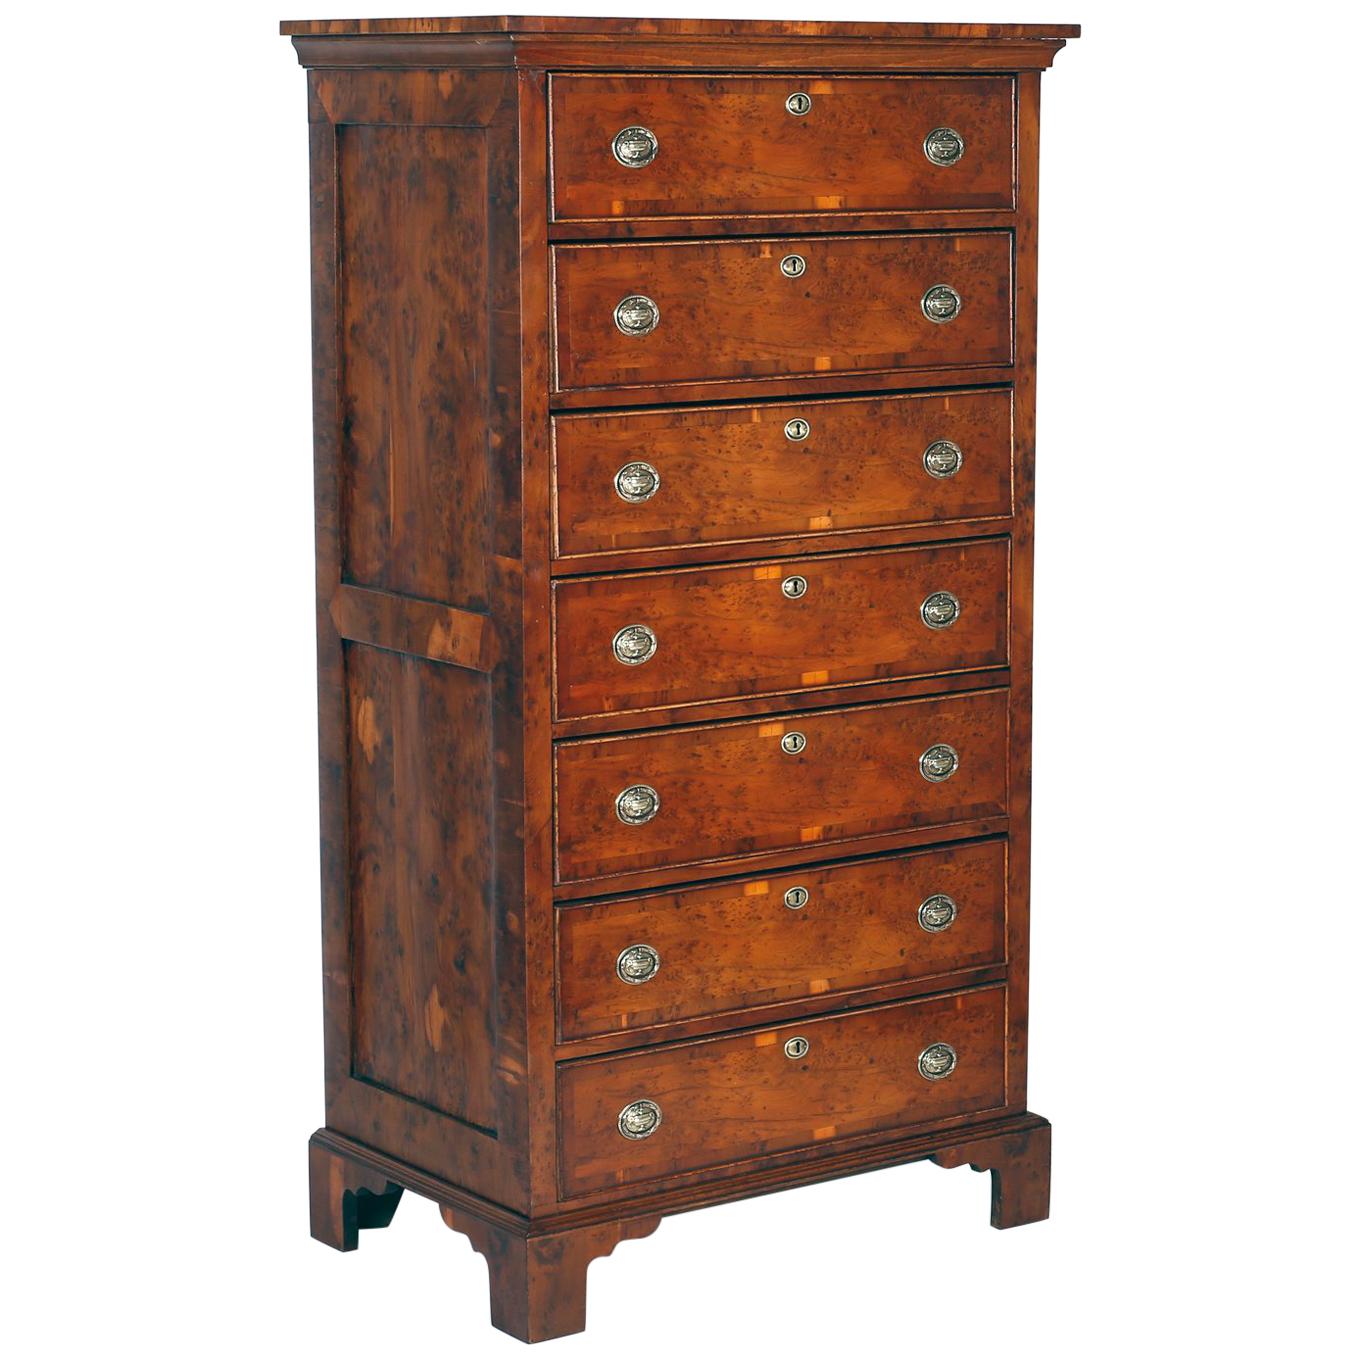 Antique English Tall Chest of Drawers